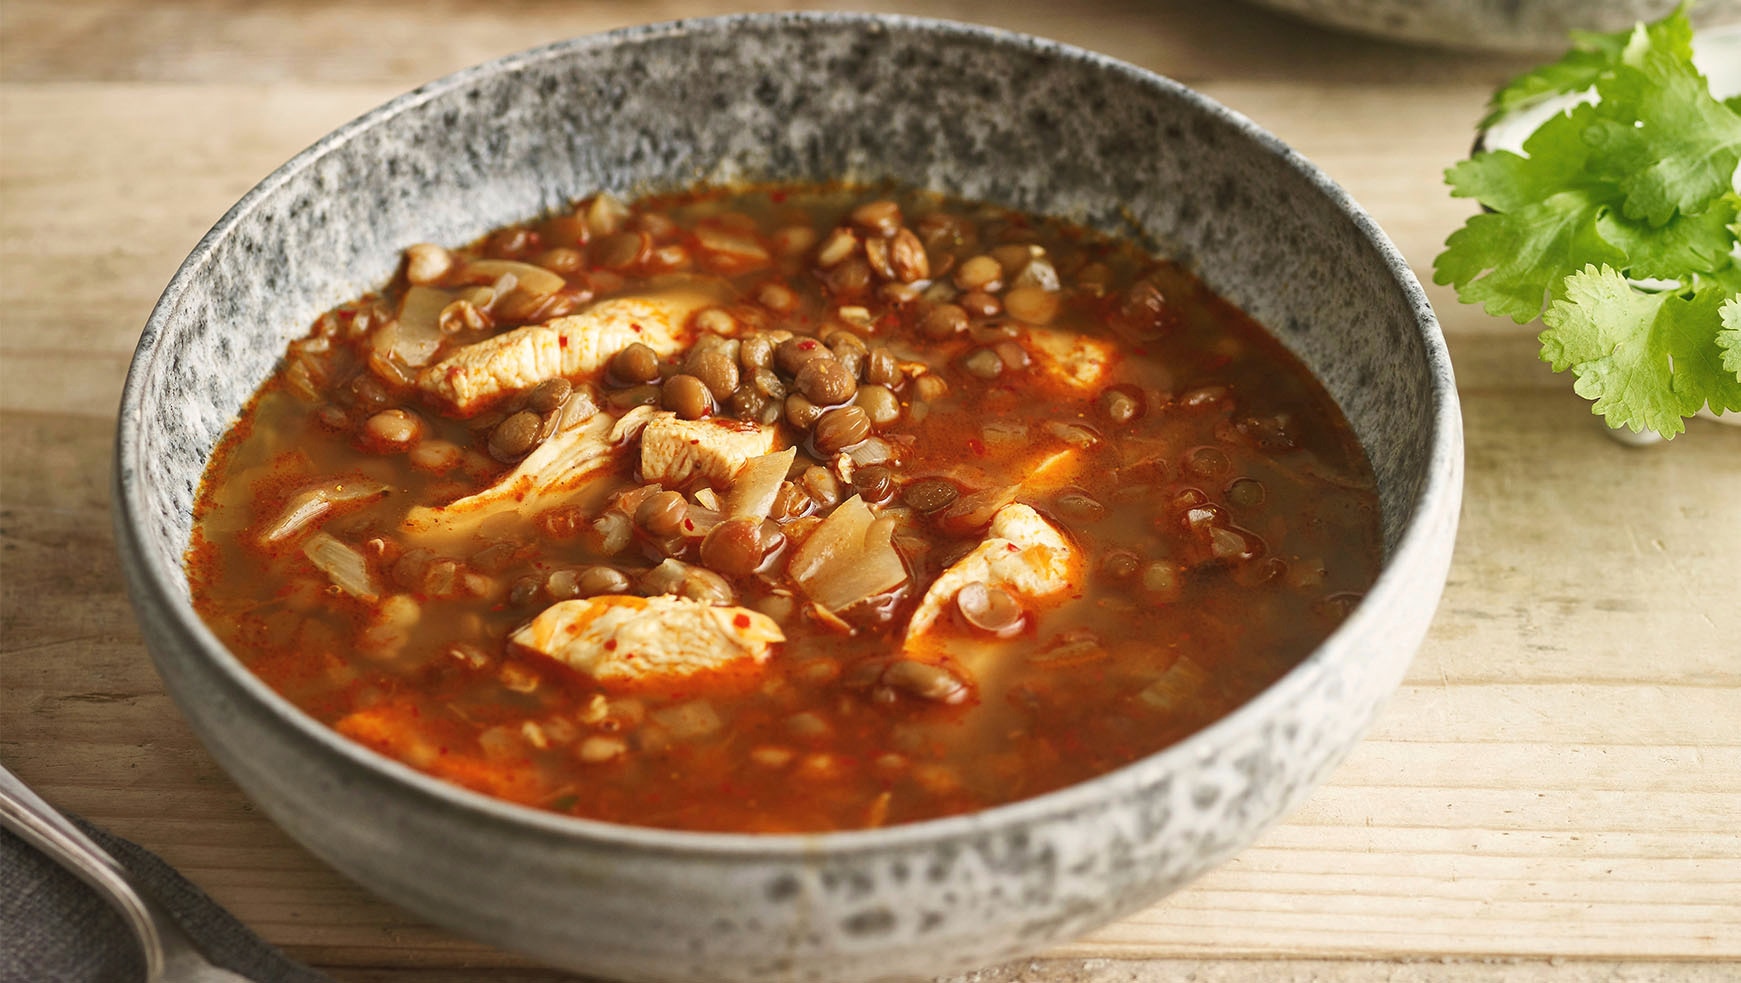 Lentil & Chicken soup in a bowl with corrainder on the side